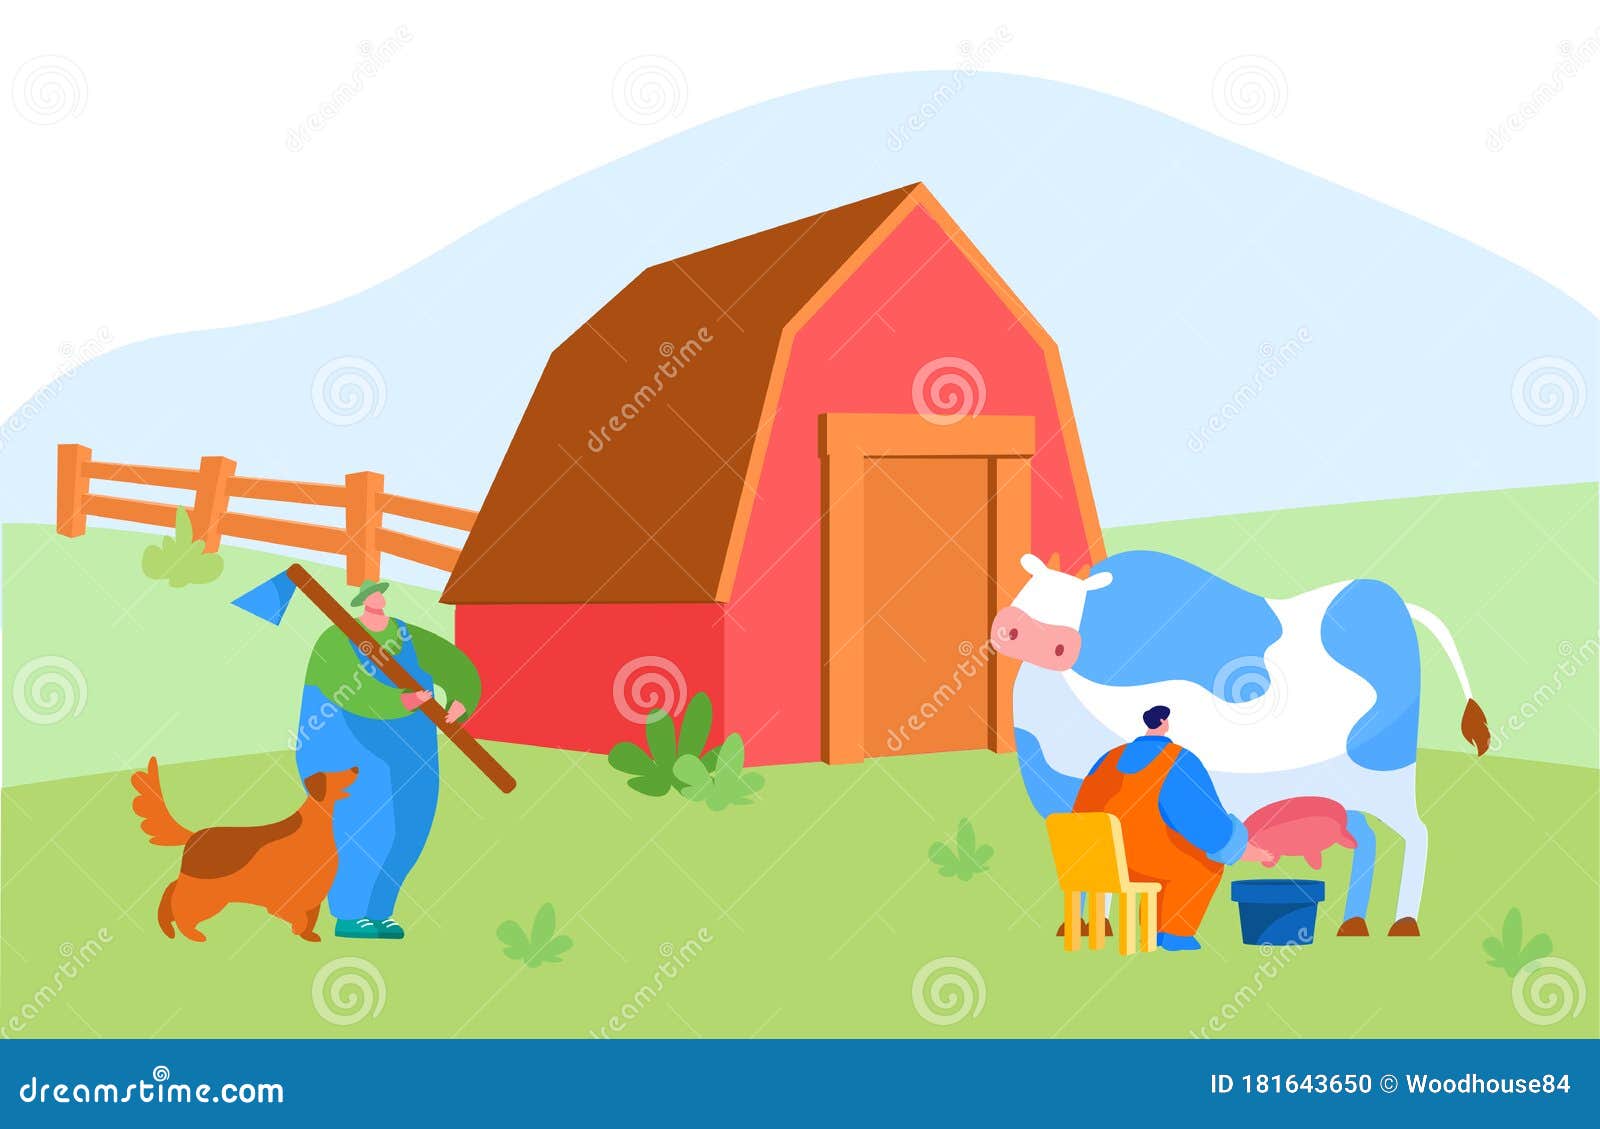 milkmaid and shepherd male characters in working on farm. man milking cow into bucket. milk and dairy farmer